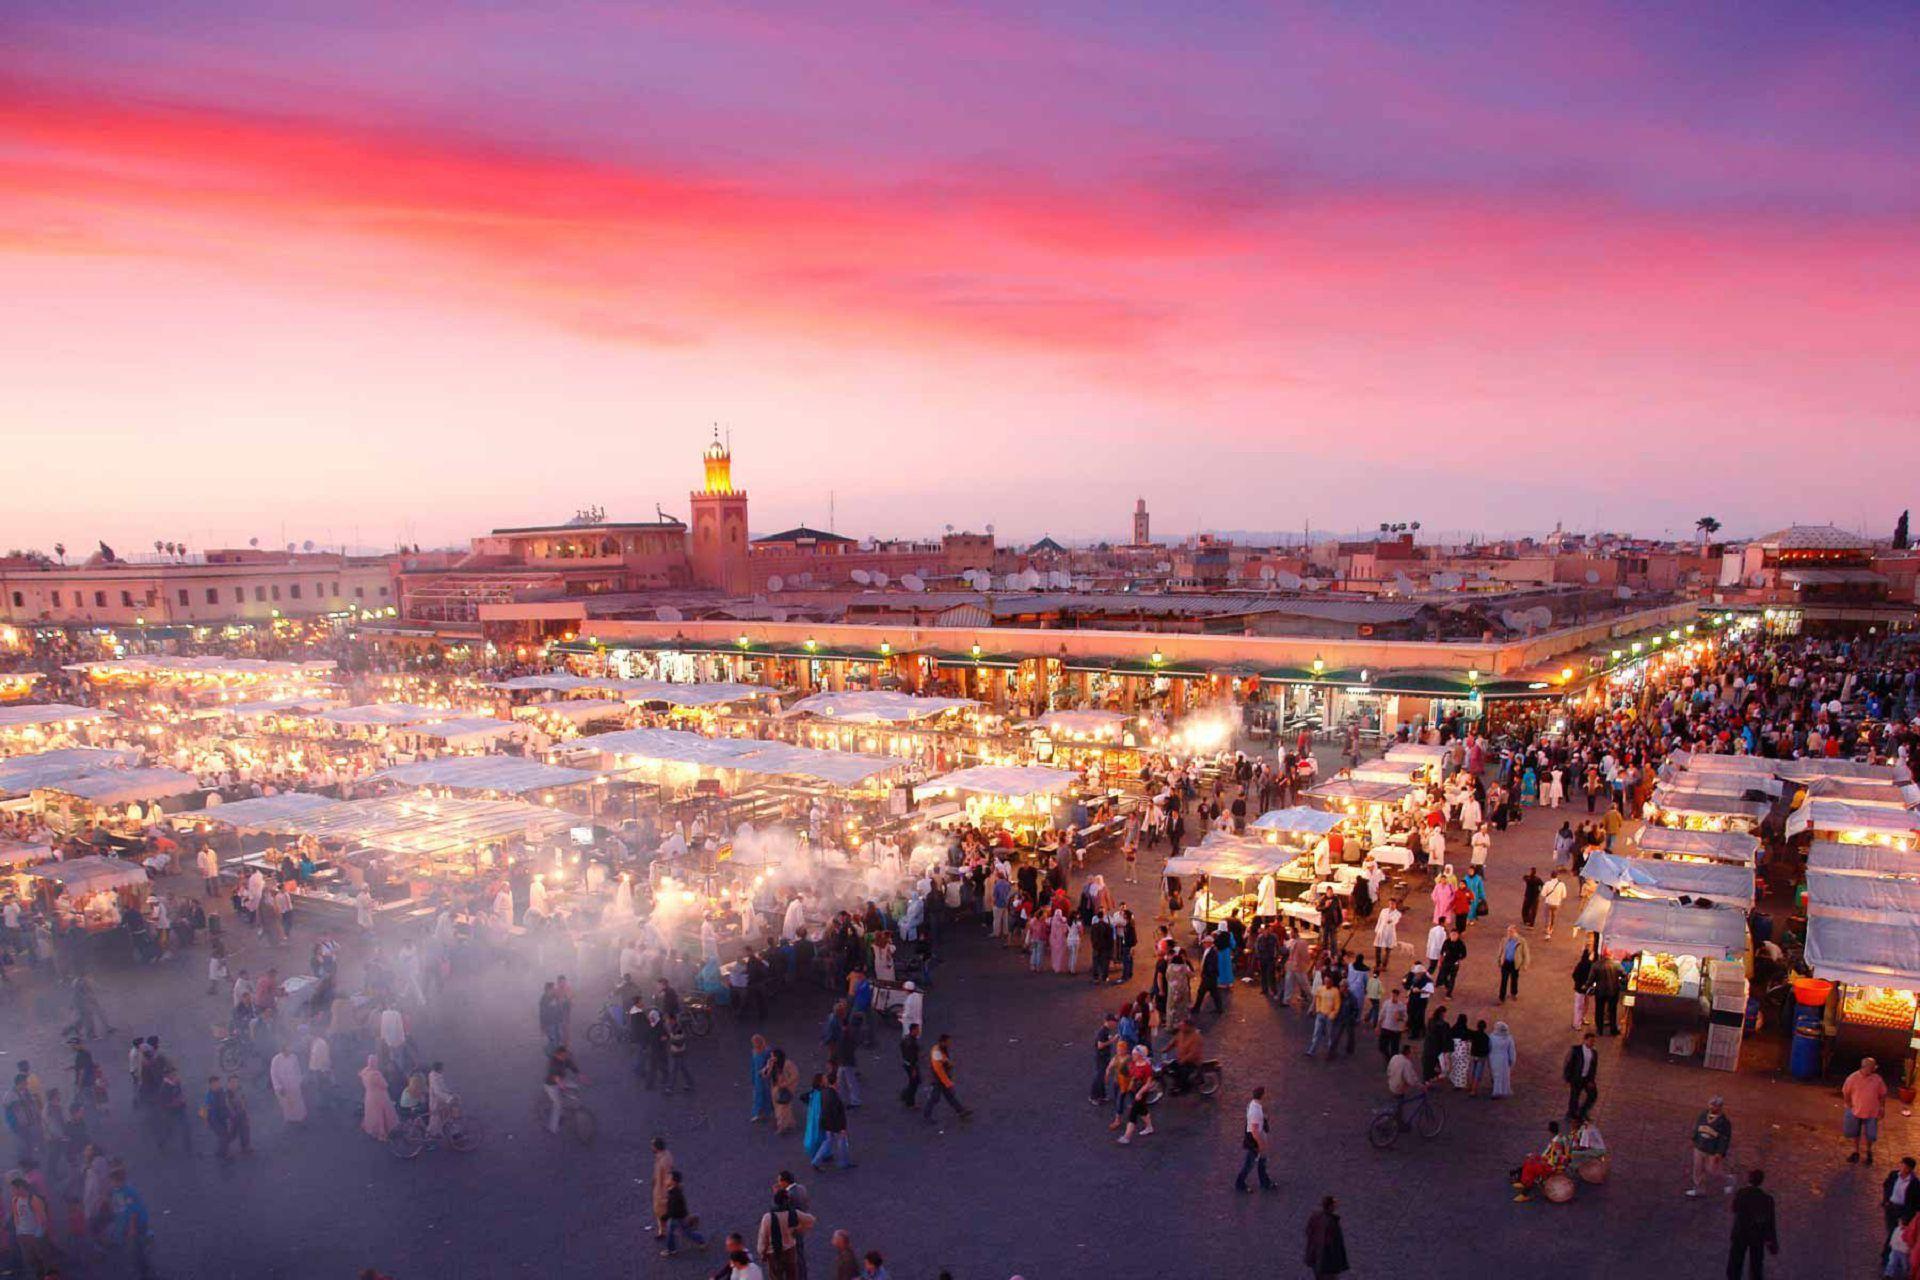 Marrakech Wallpaper Image Photo Picture Background